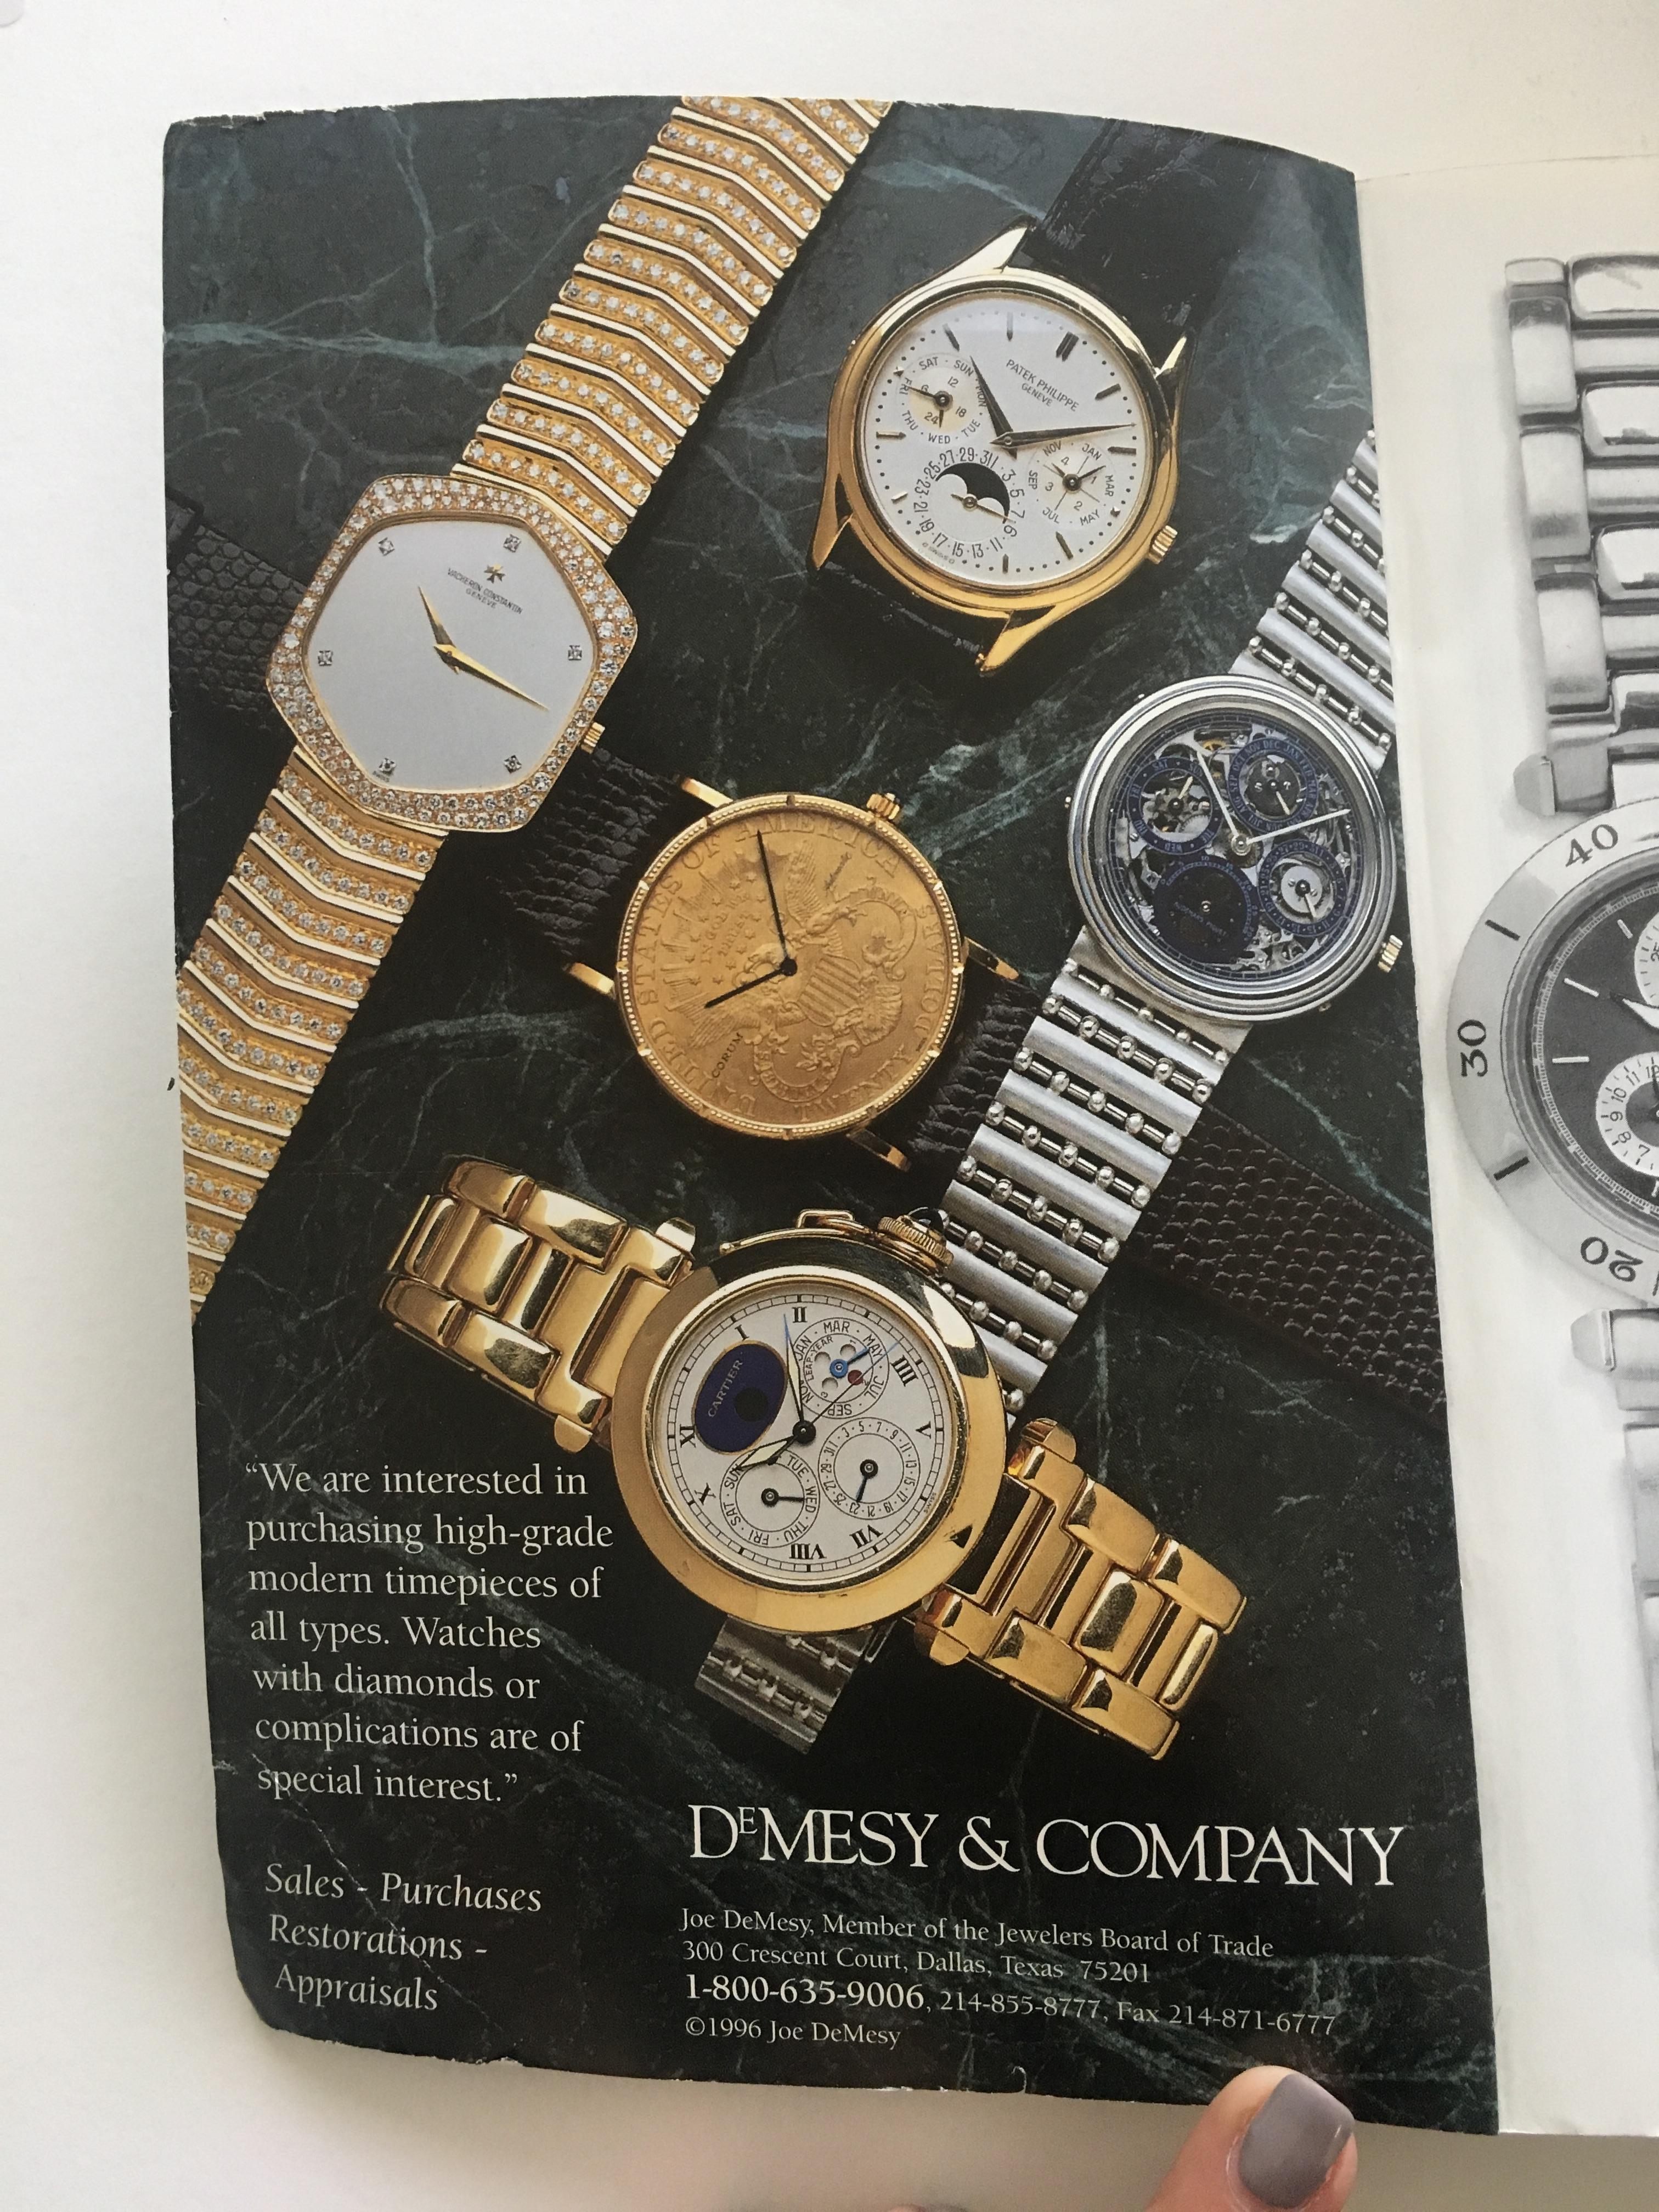 VOLUME 7: Vintage American & European Silver Anniversary Wristwatch Price Guide Published in 1996